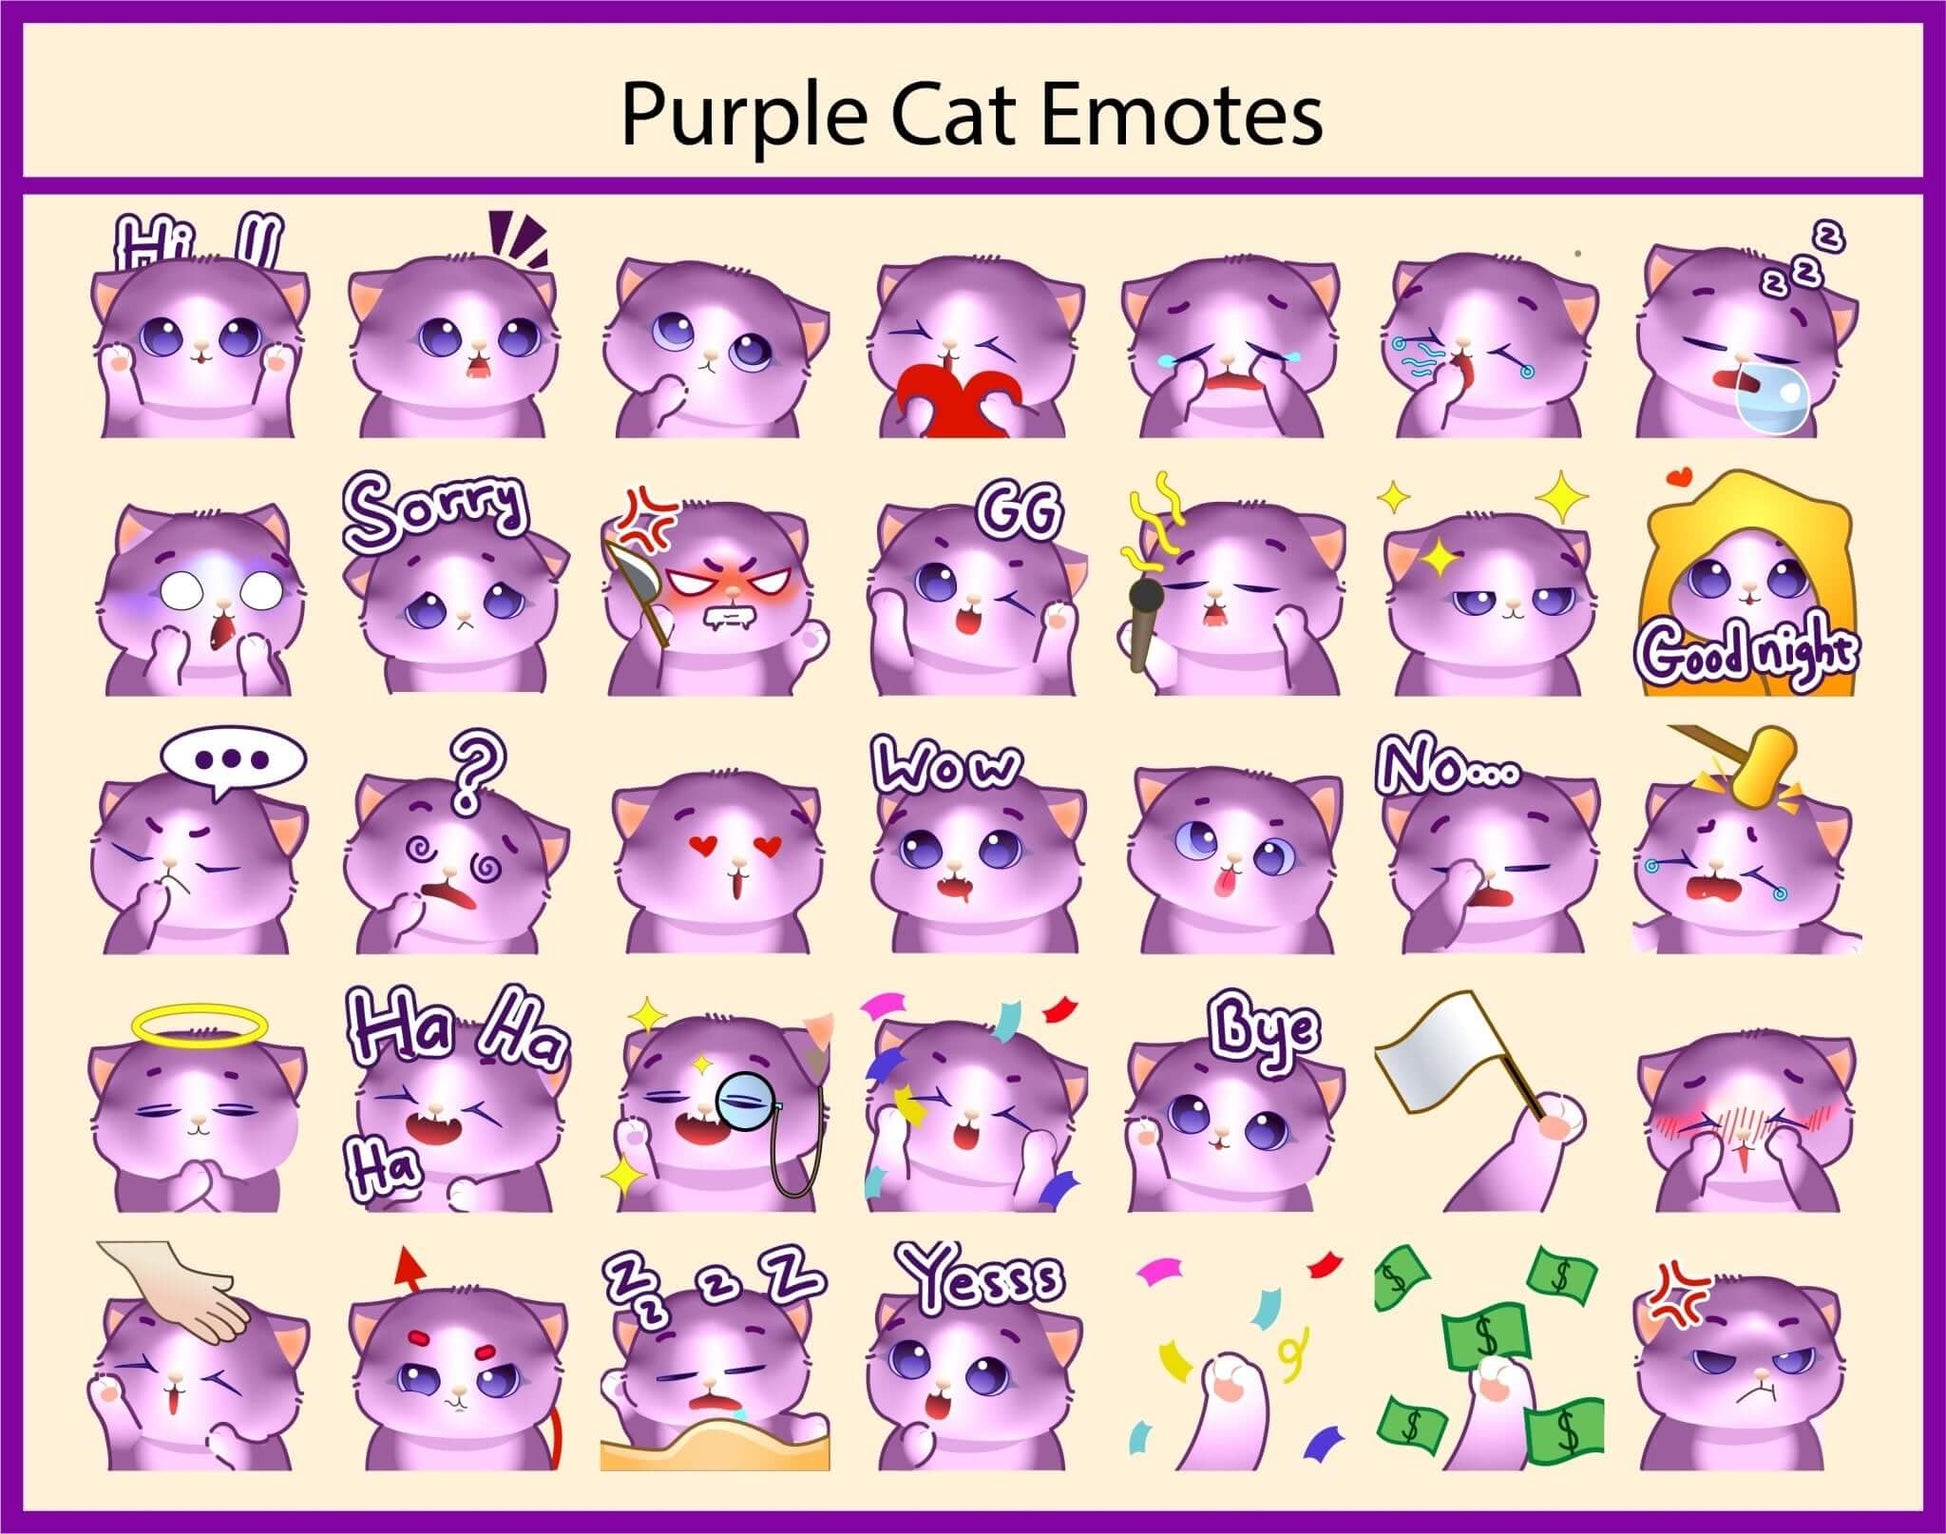 Cute Cat Twitch Emotes for Chatting - Static Emotes - Stream K-Arts